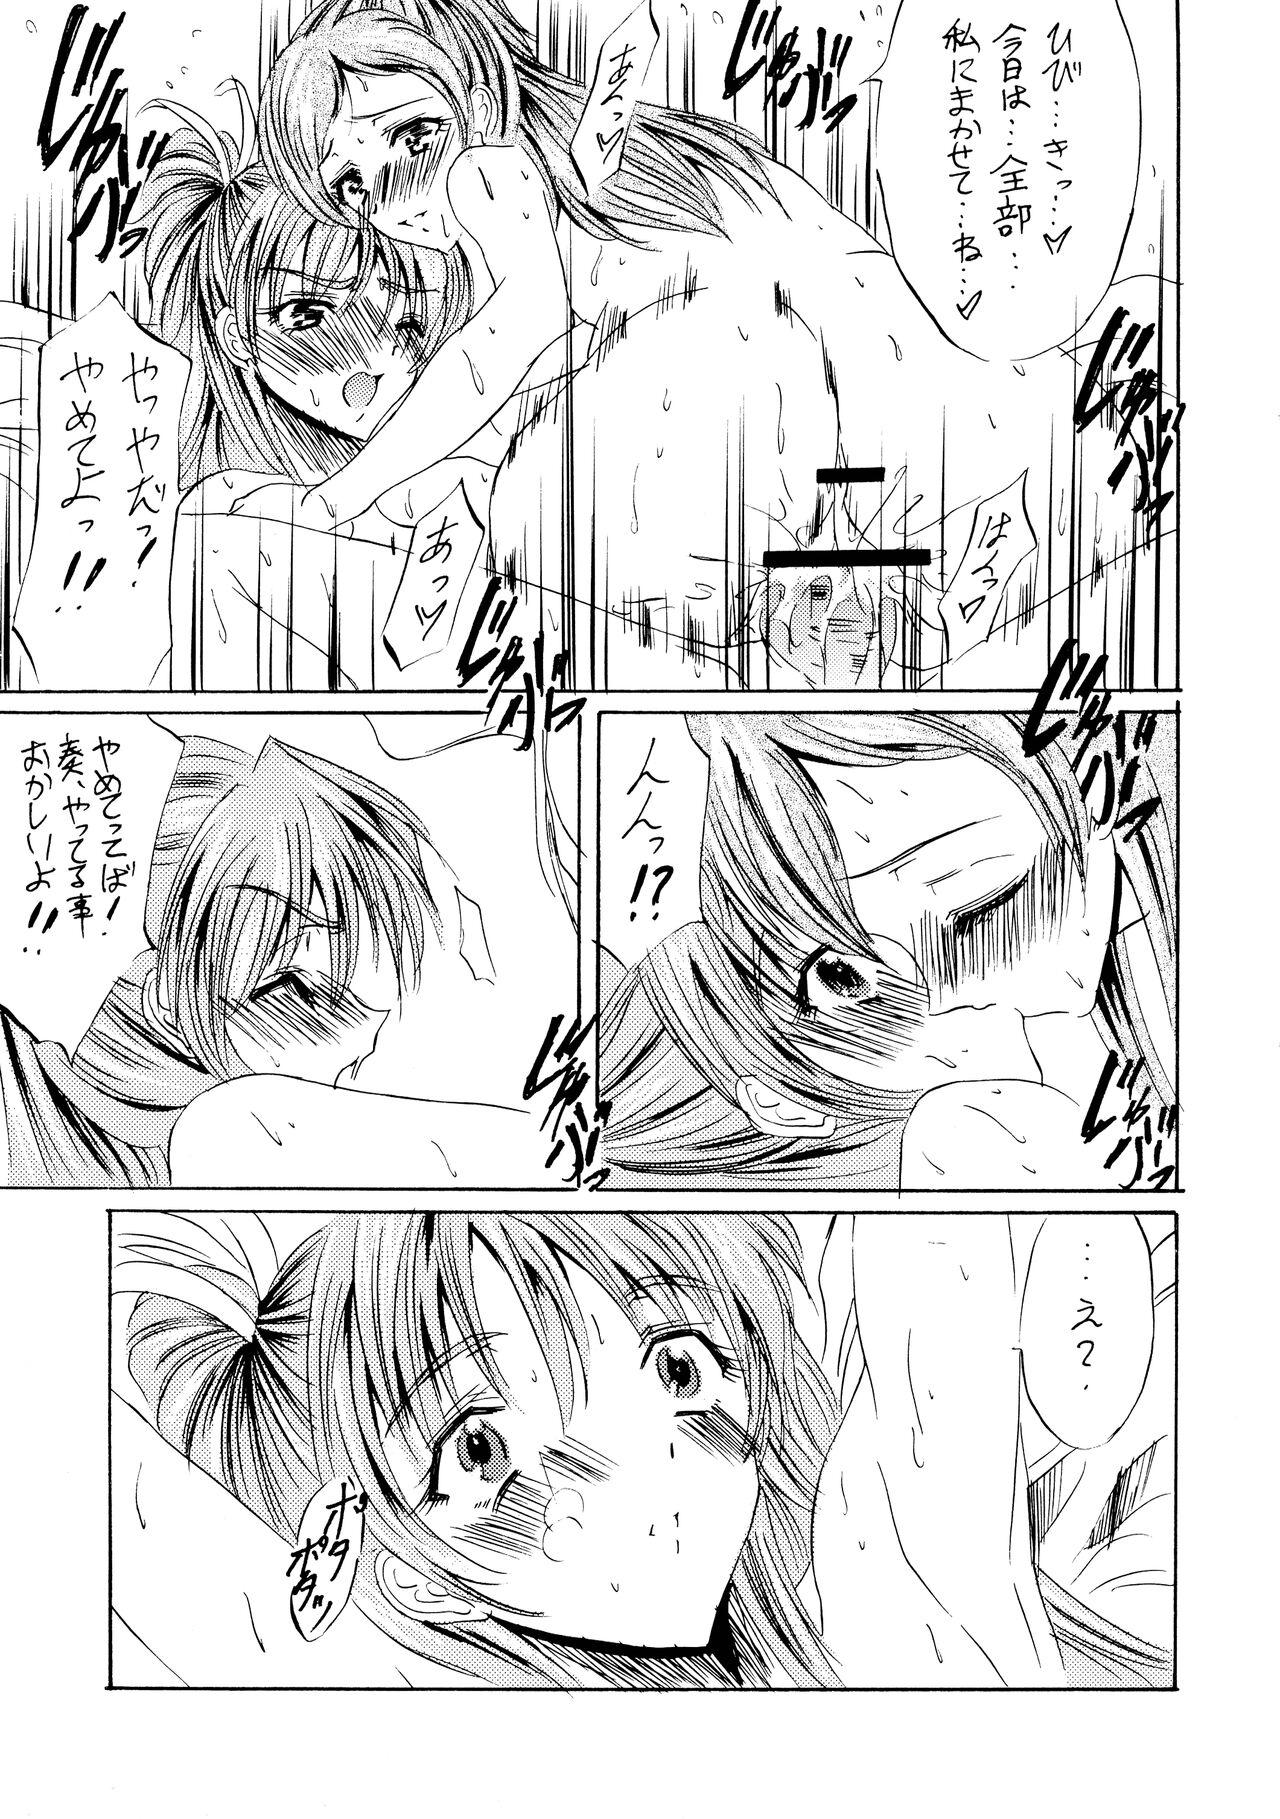 Playing Hermony Love - Pretty cure Femdom Porn - Page 7